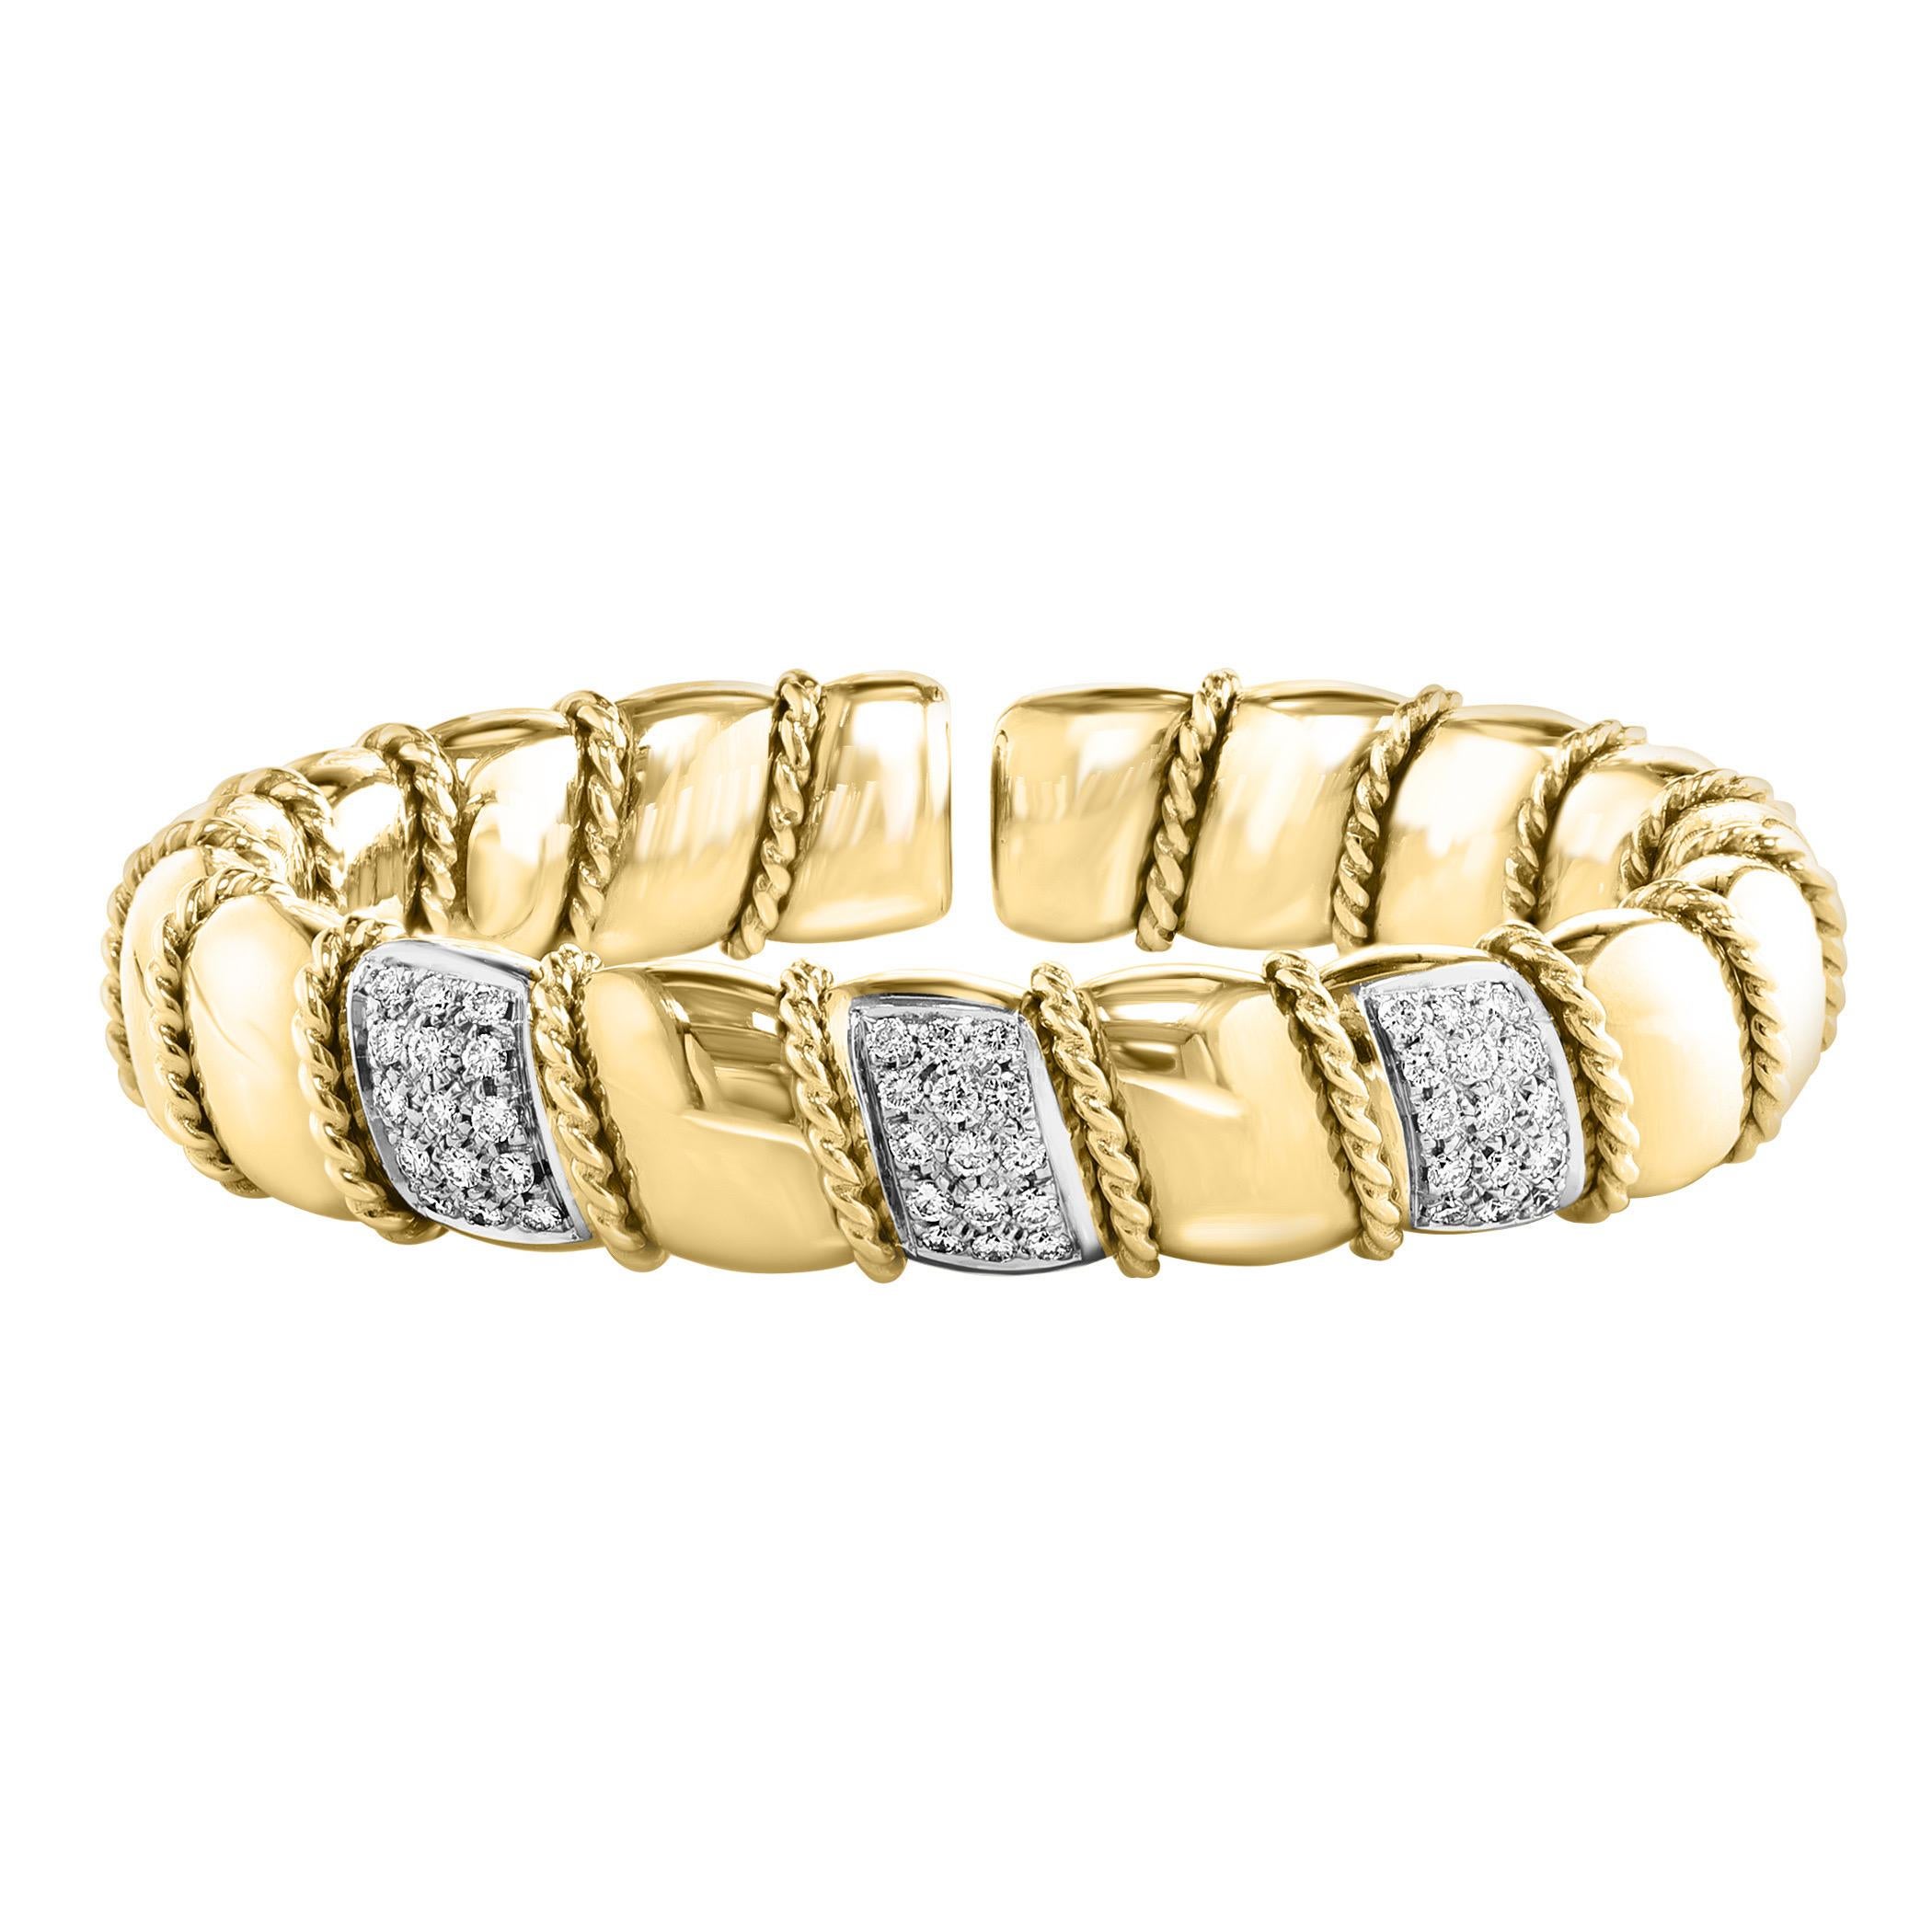 This exquisite vintage cuff bangle bracelet showcases two carats of dazzling diamonds set in an elegant 18 karat solid yellow gold. The bangle is designed with three bars adorned with round brilliant cut diamonds, creating a stunning visual appeal.